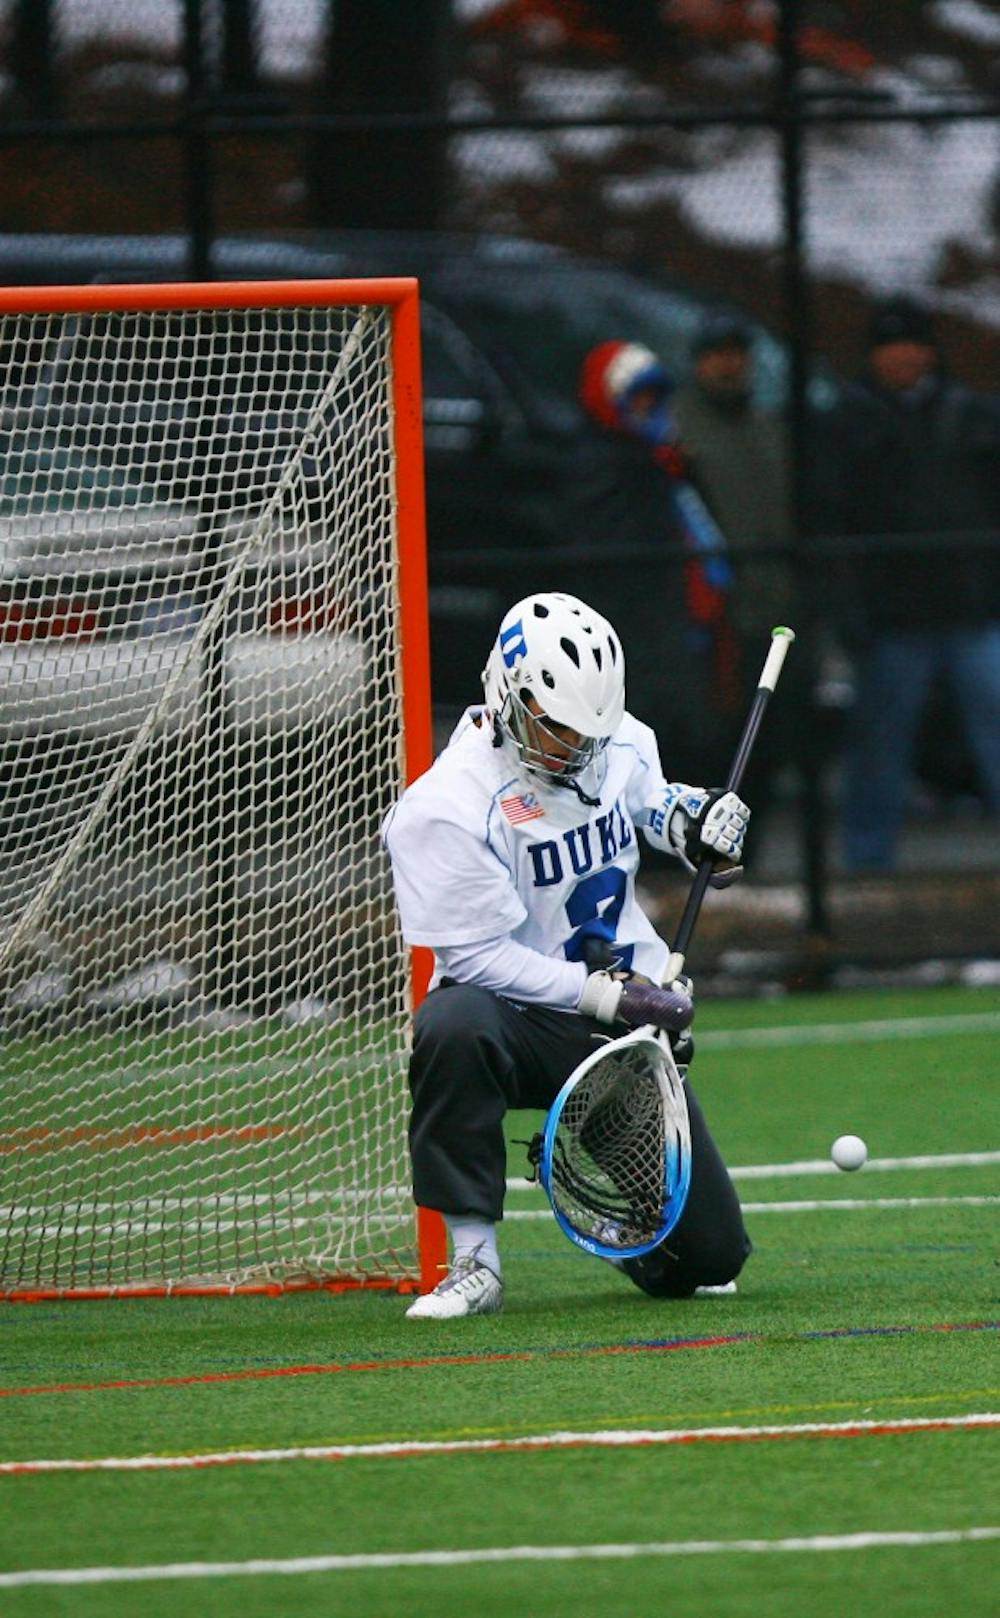 It was a rough afternoon for Luke Aaron and the Blue Devil defense, as Syracuse put together a 13-goal first half and kept it going after halftime, winning 19-7.